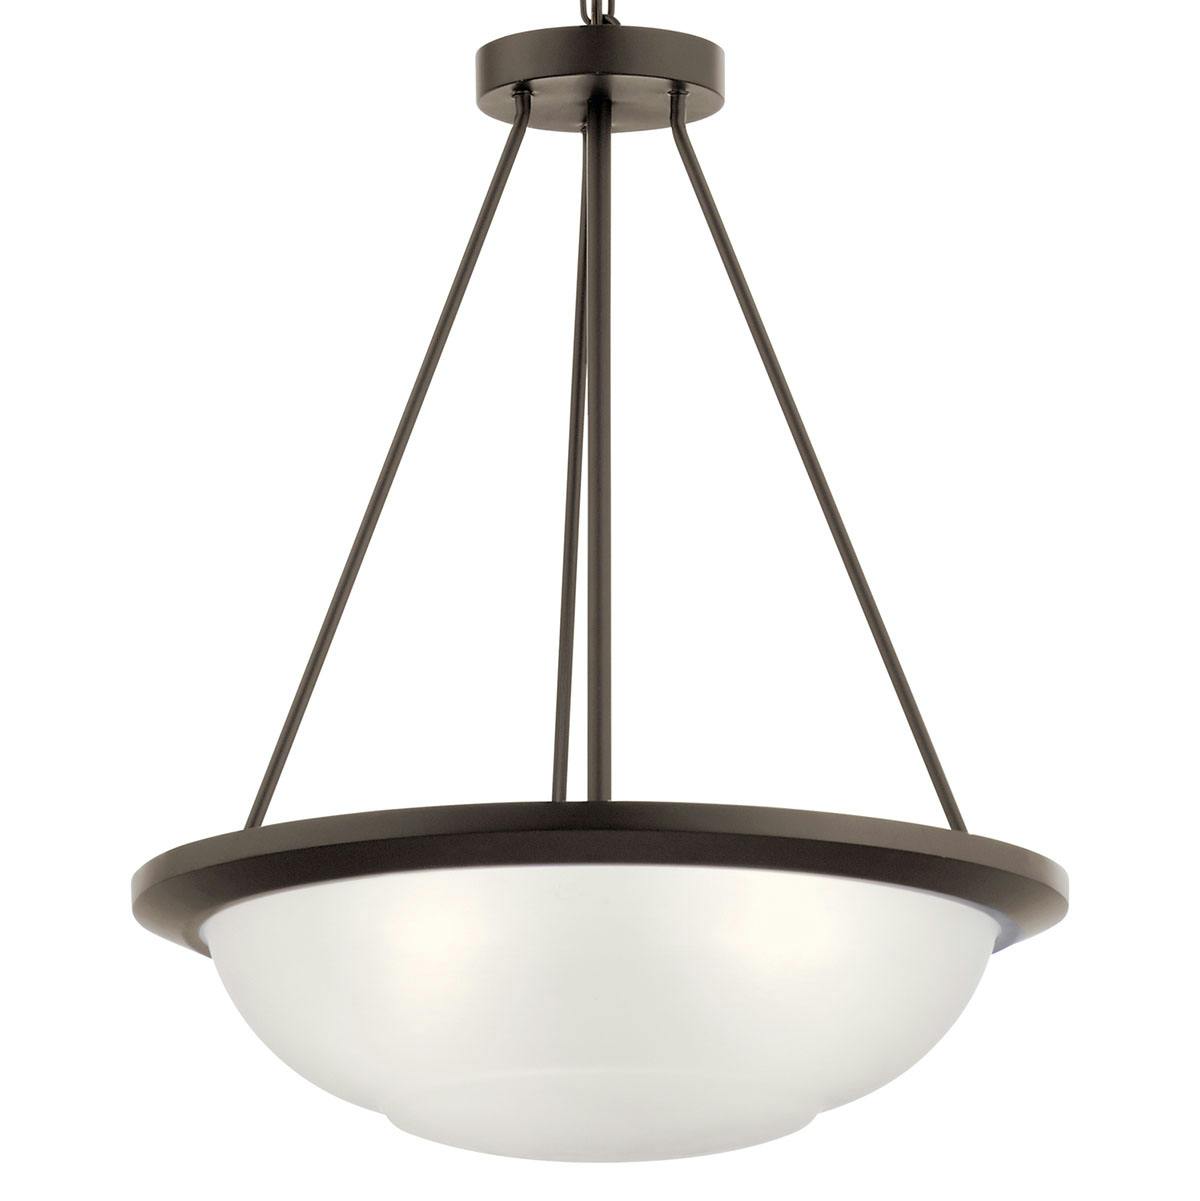 Close up view of the Ritson 3 Light Inverted Pendant Bronze on a white background